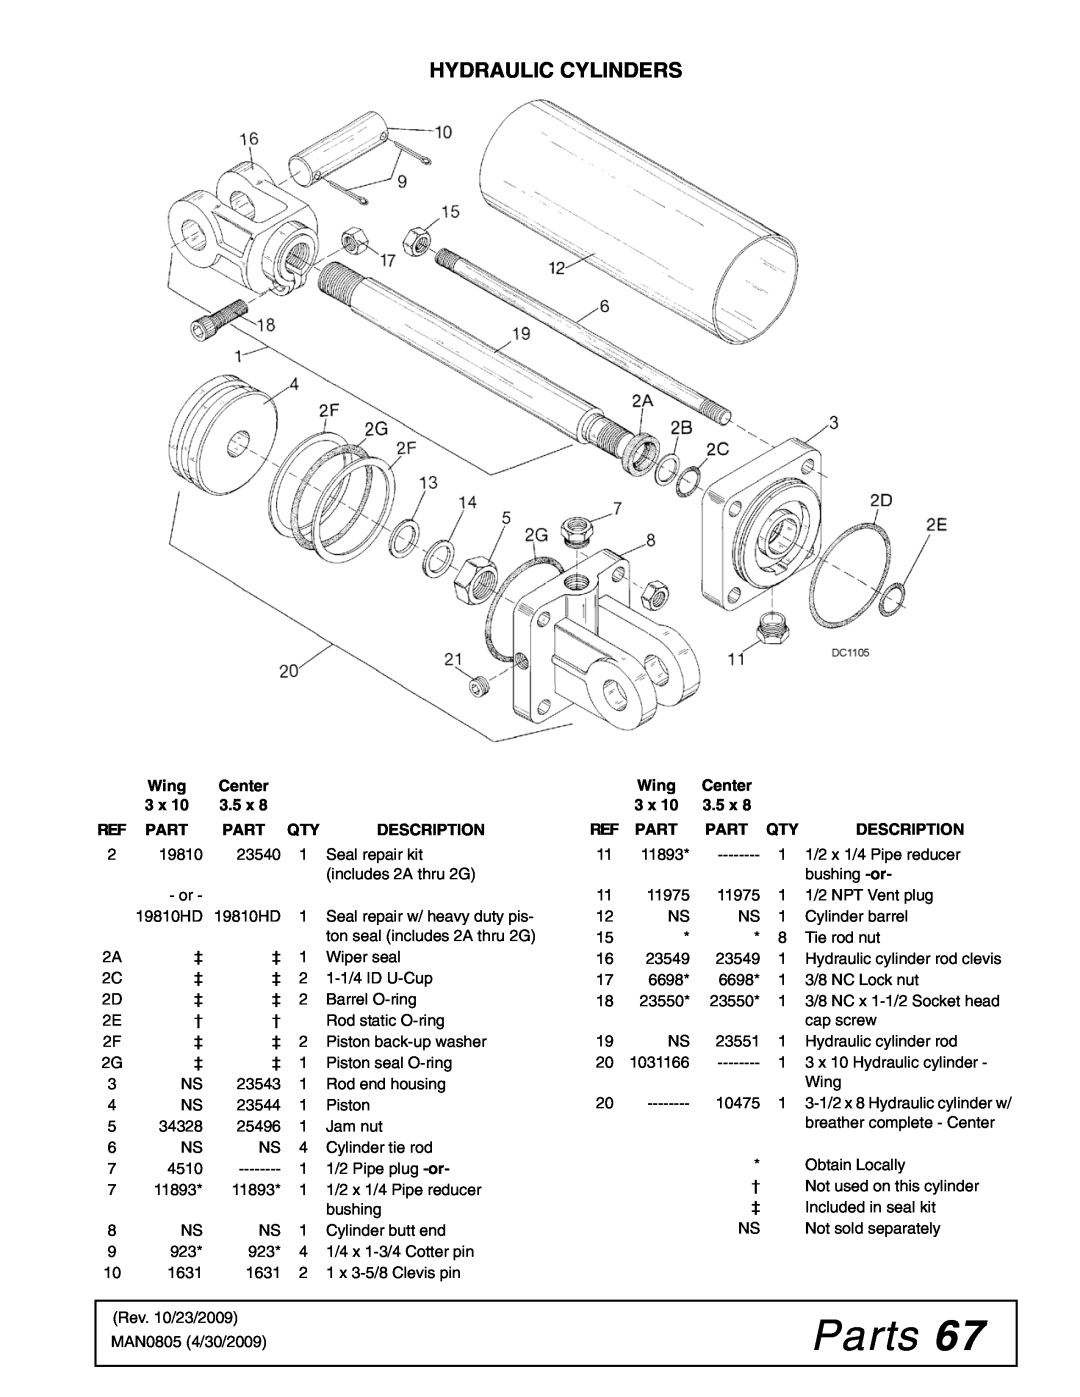 Woods Equipment BW180HBQ, BW126HBQ manual Parts, Hydraulic Cylinders, Wing, Center, Description, 3.5 x 